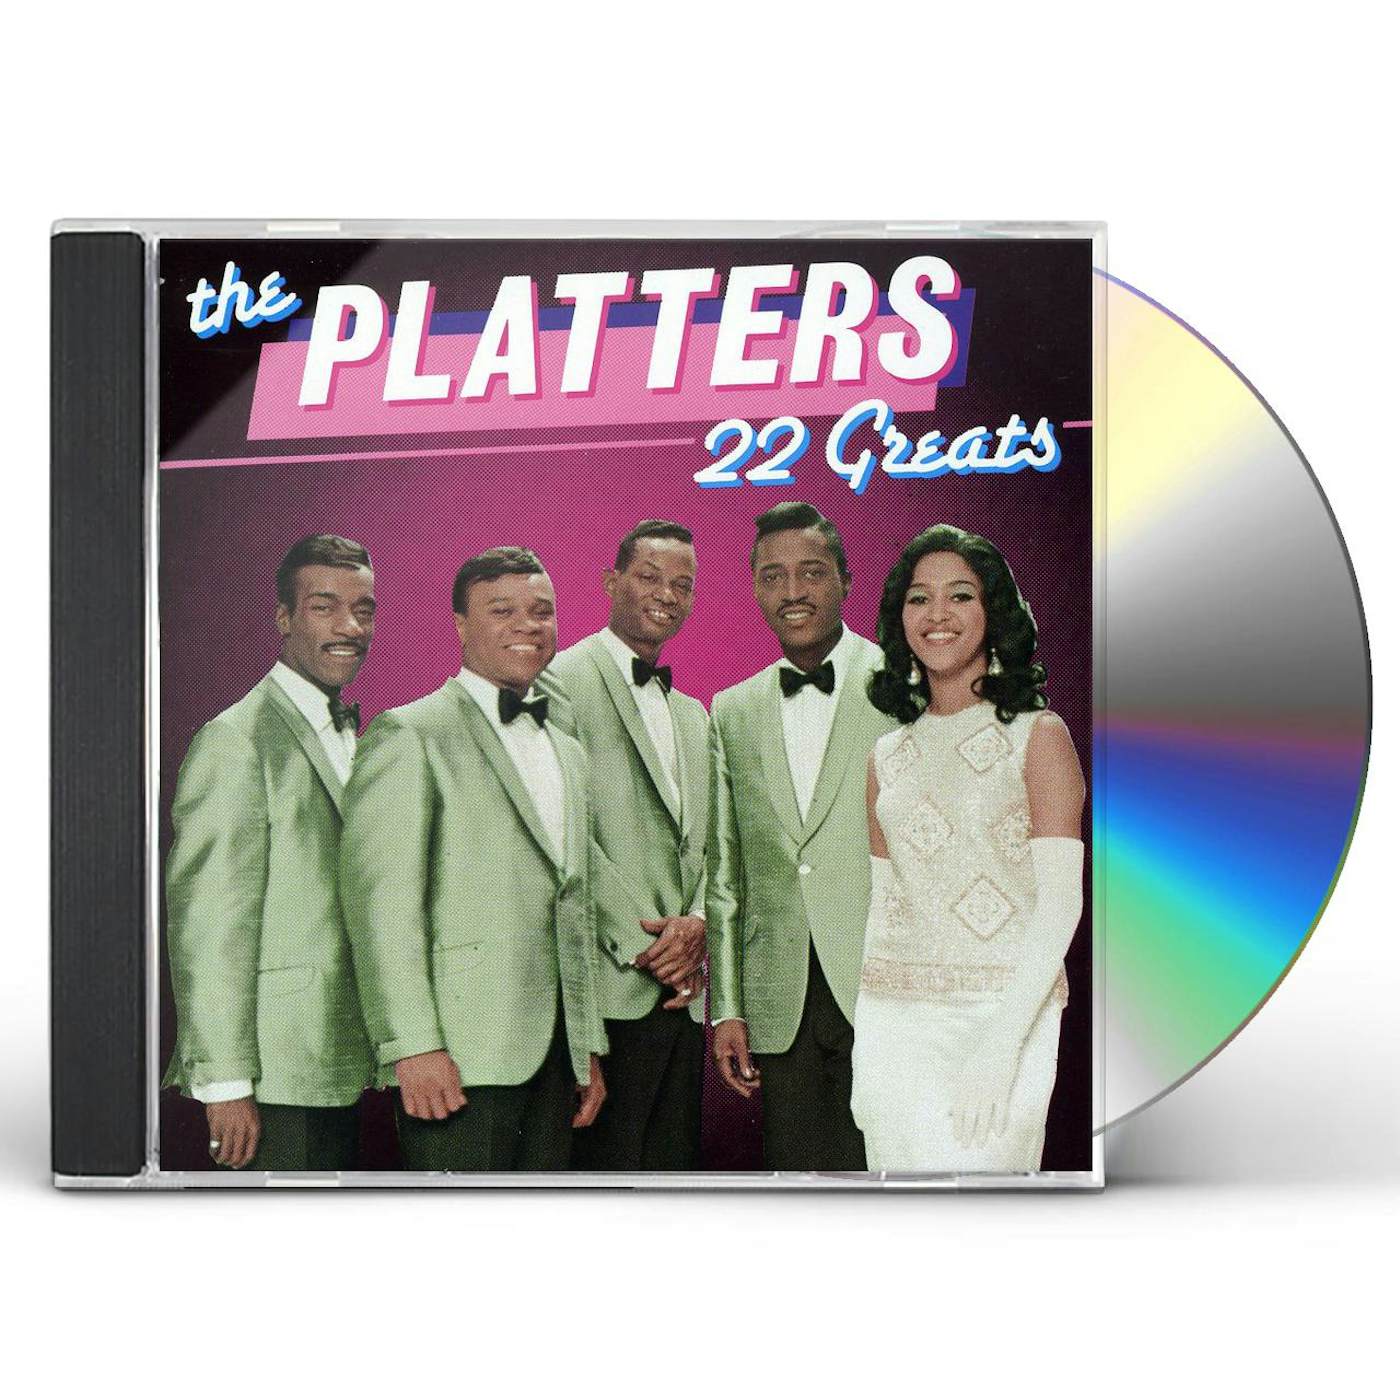 The Platters 22 GREATS CD